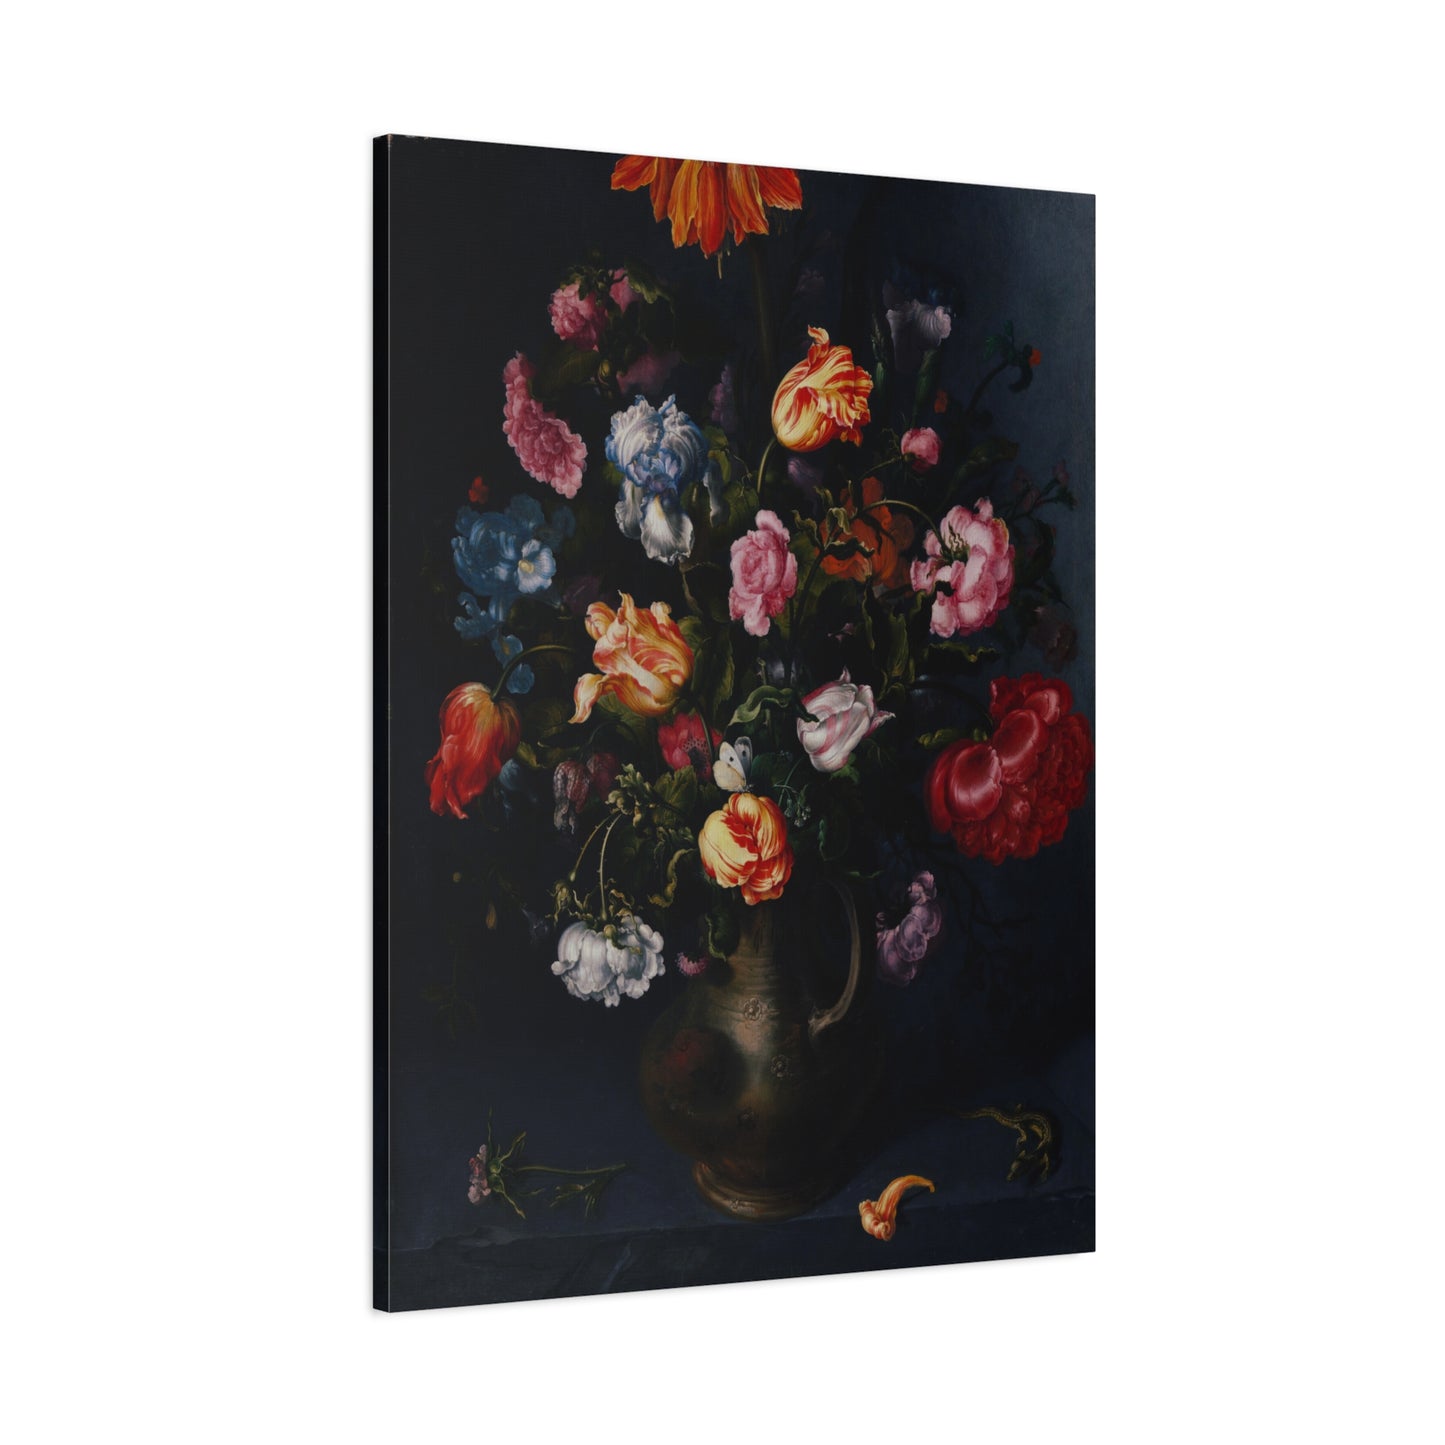 A Moody Vase with Flowers Canvas Print